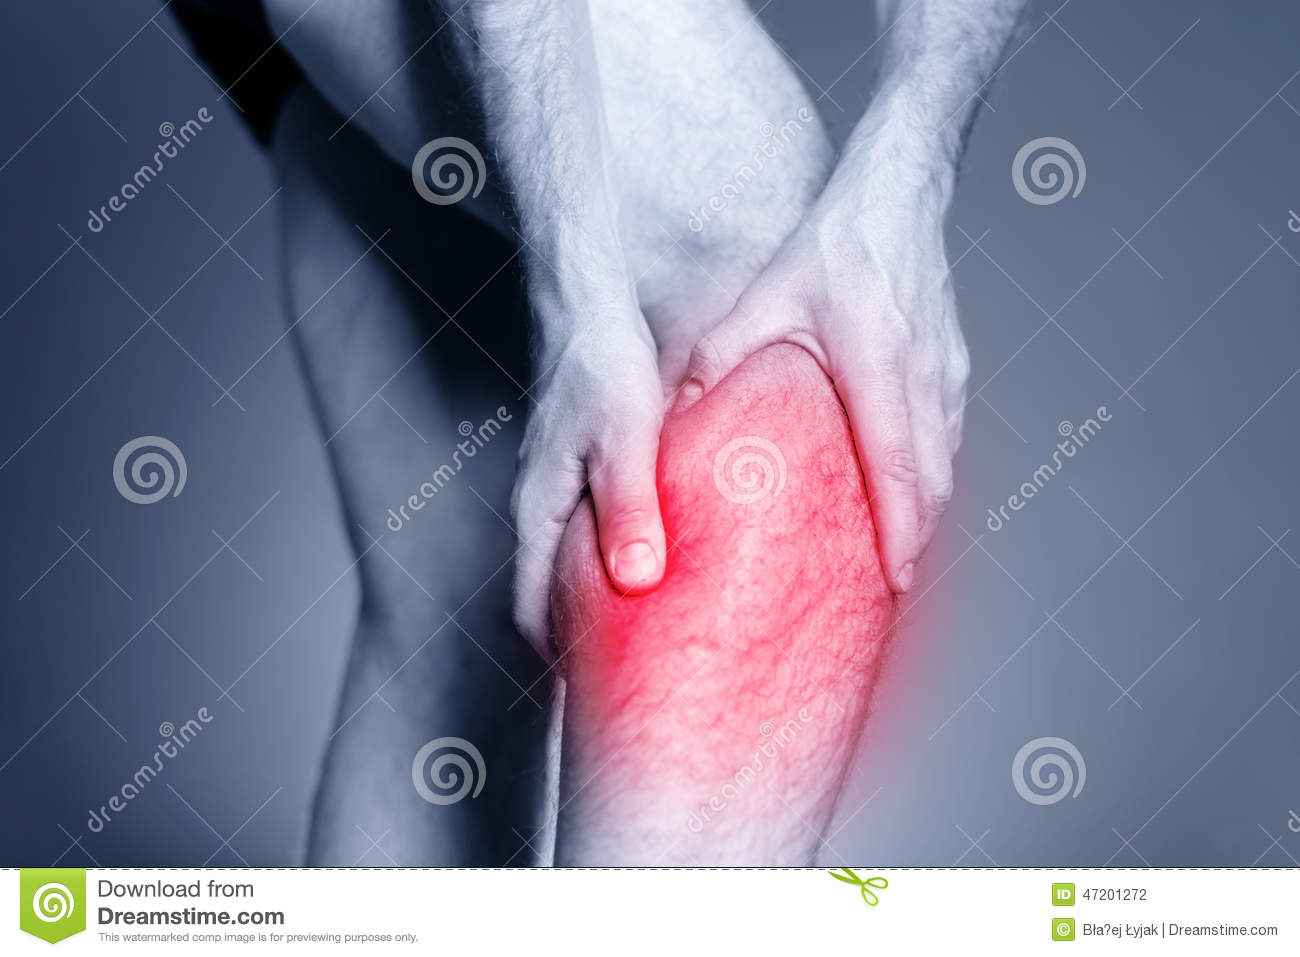 Calf Leg Pain Man Holding Sore And Painful Muscle Sprain Or Cramp